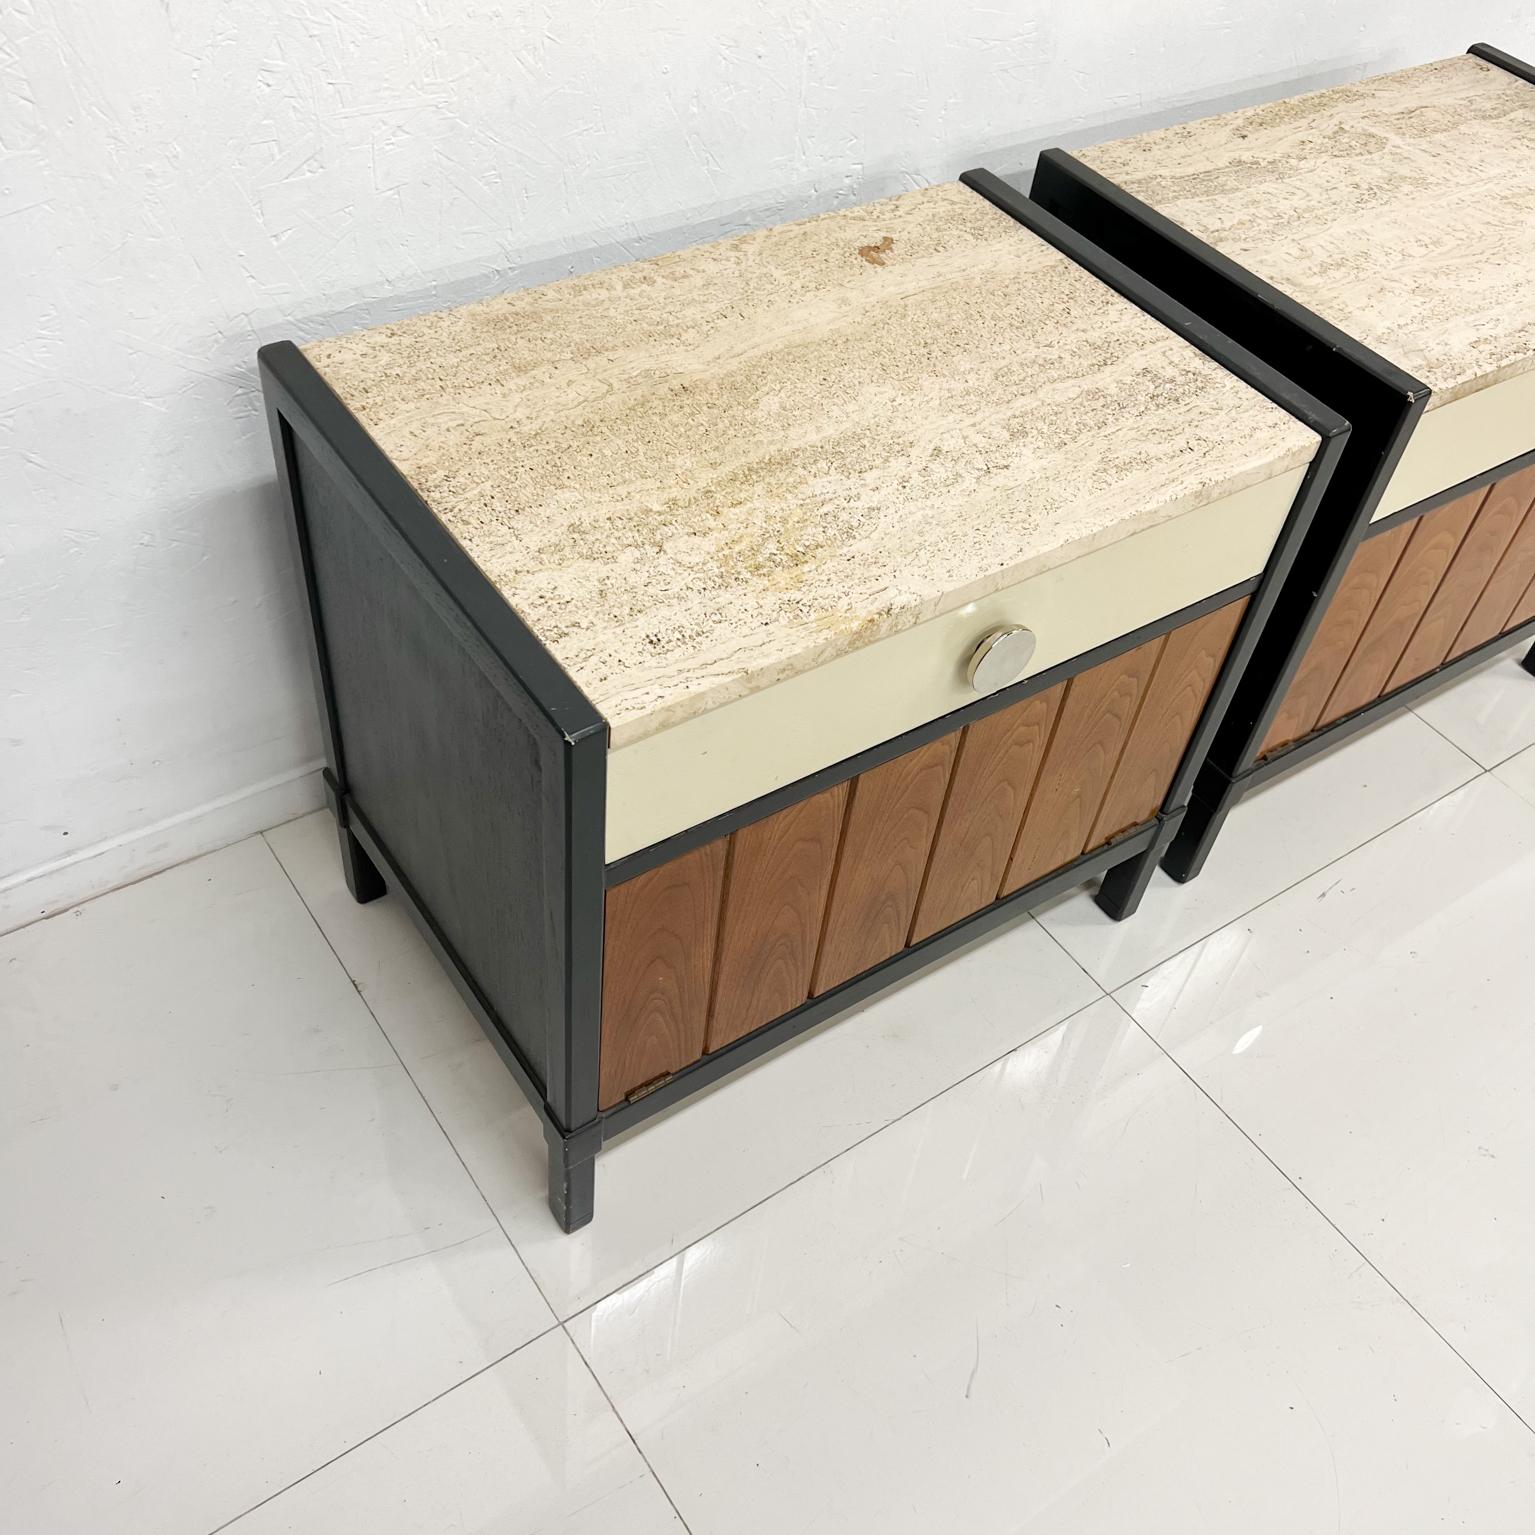 1960s Stylish Drexel Nightstands Two-Tone Travertine Wood Cabinet End Tables 2